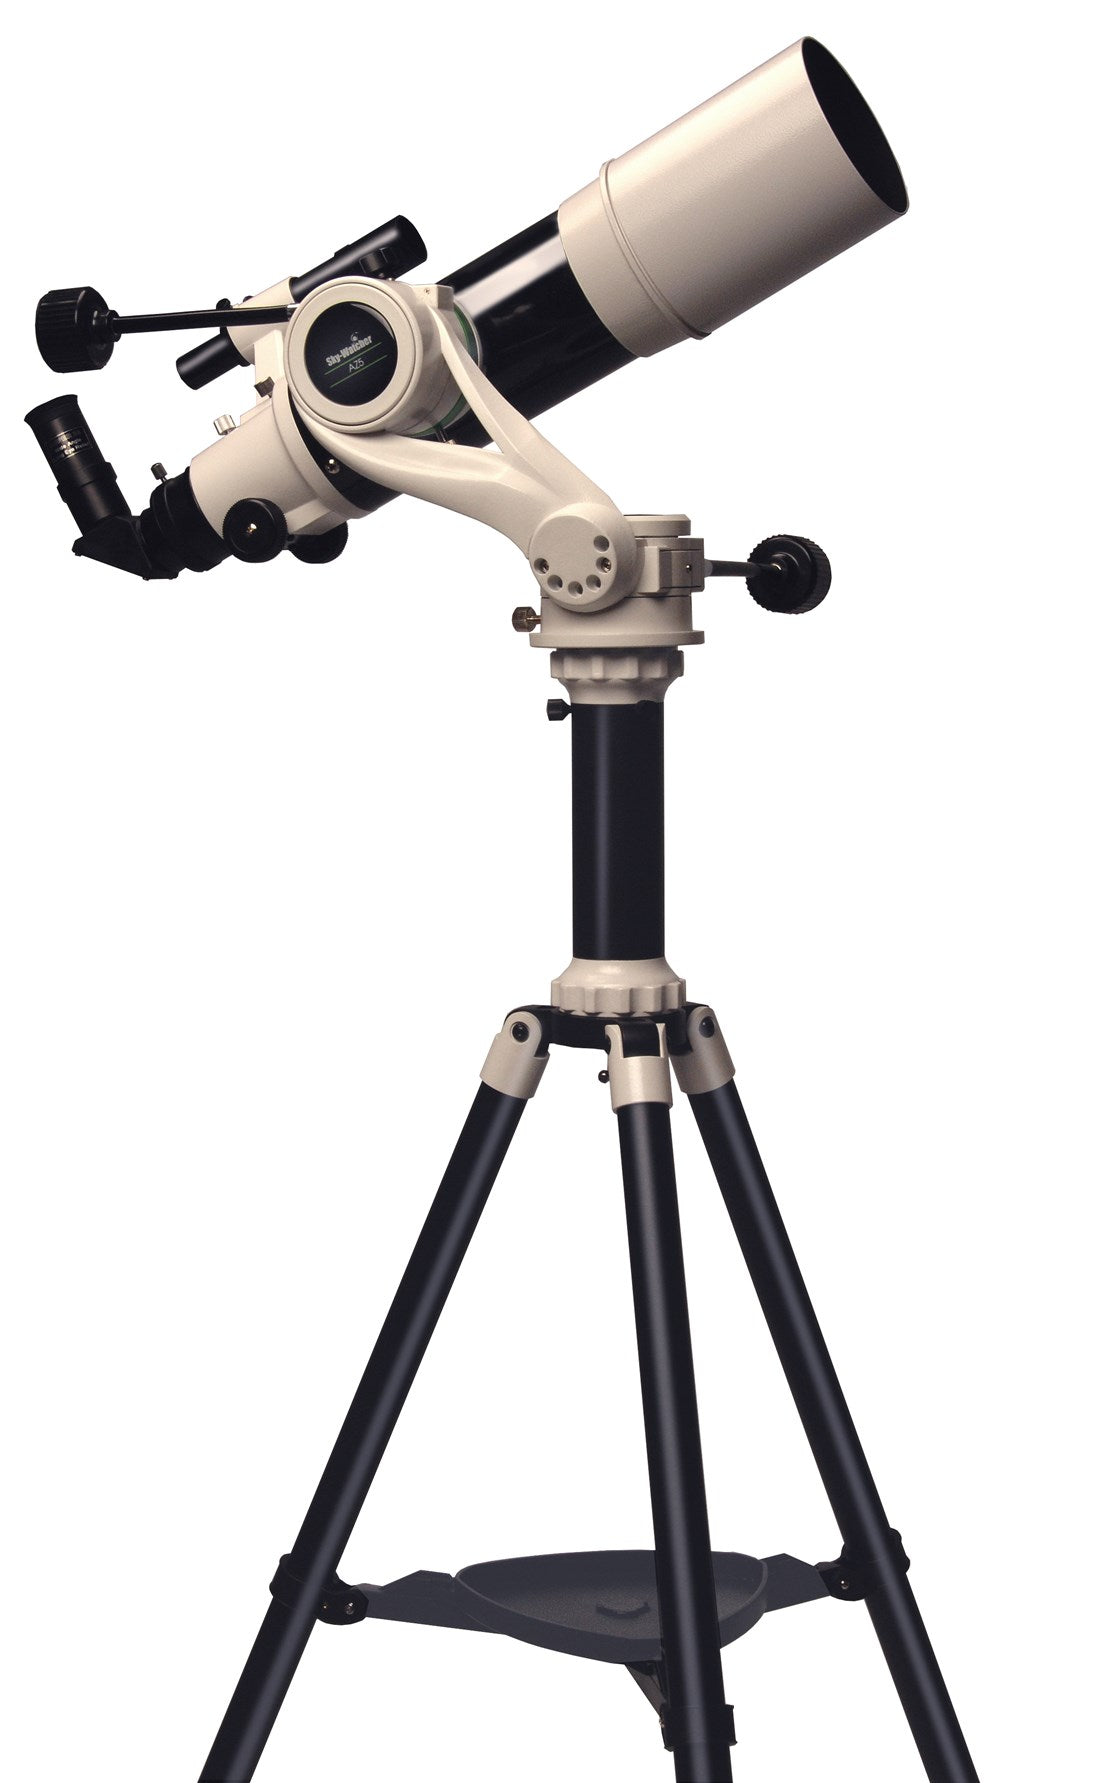 Product Image of Sky-watcher 102mm (4") f4.9 deluxe Alt - Azimuth Reflector telescope (10261)